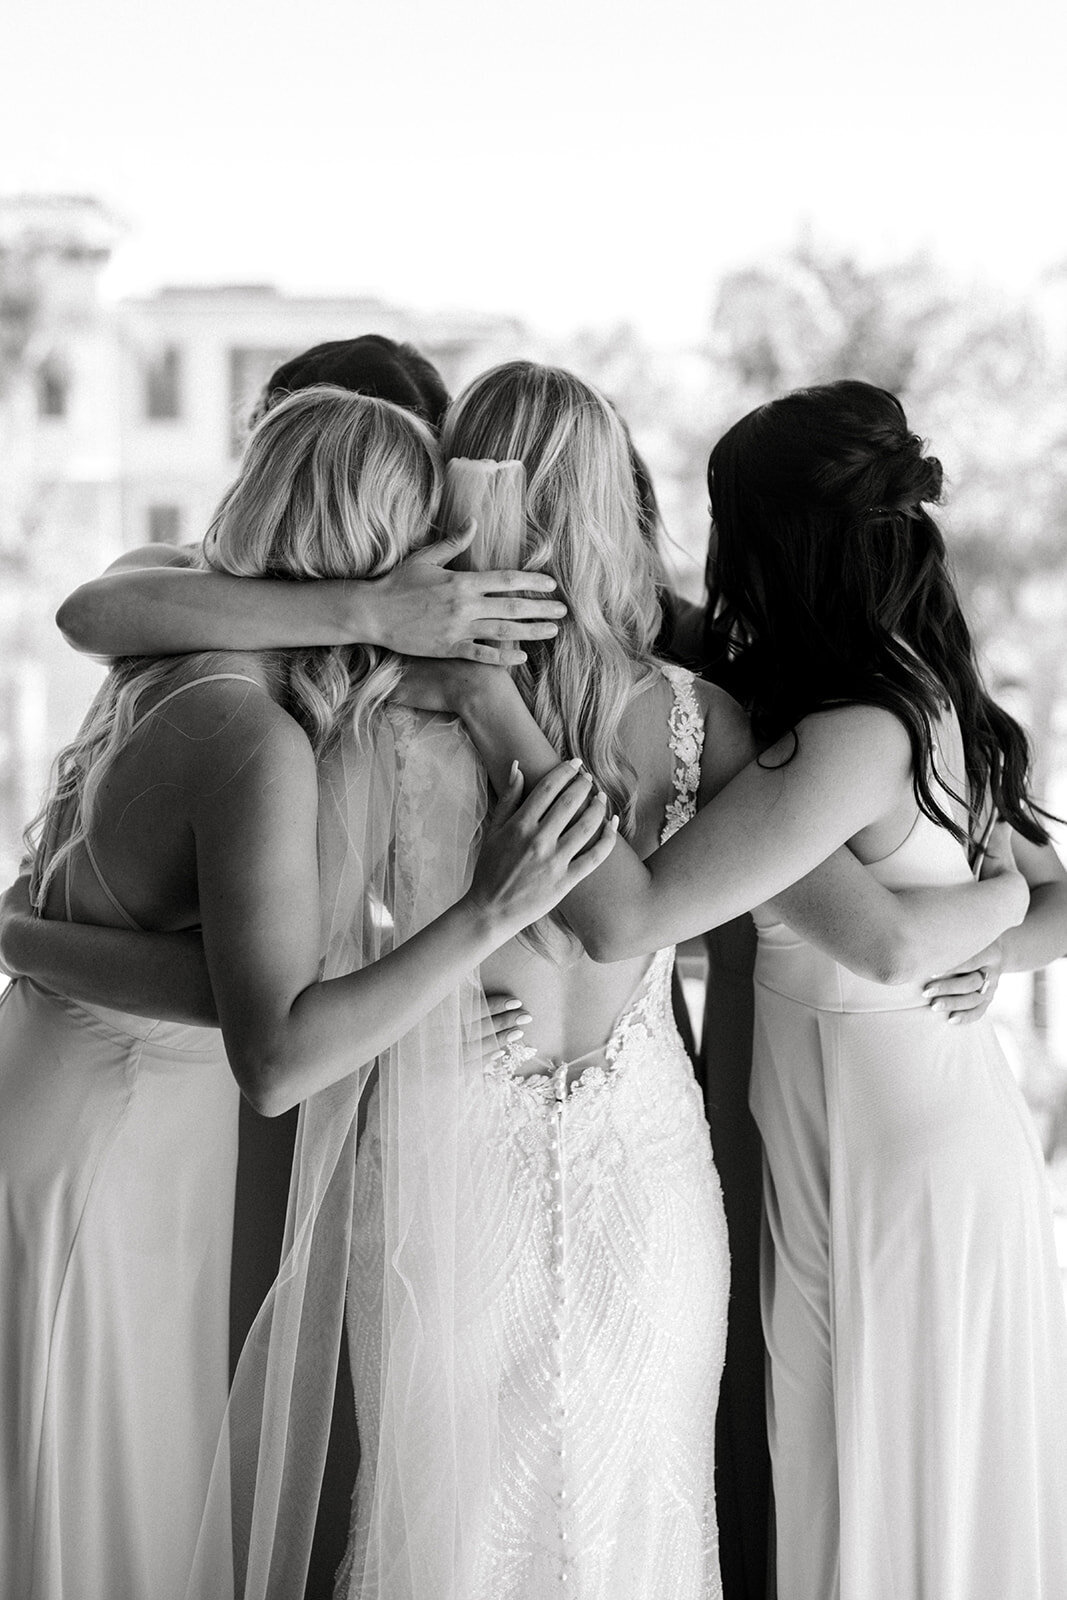 Bridesmaids wedding embrace at Dolphin Bay Resort in Pismo Beach, CA